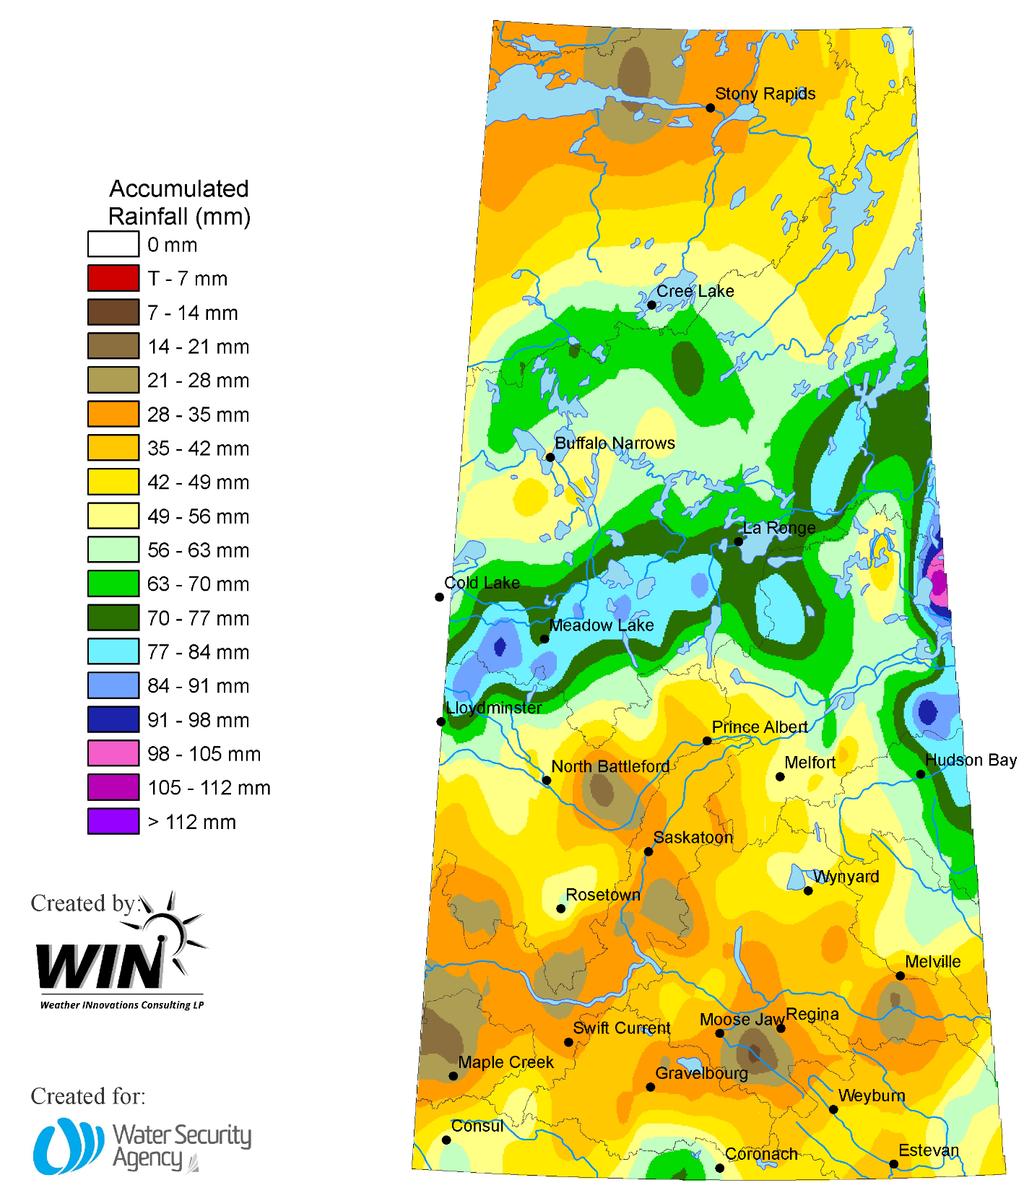 Figure 2 shows the cumulative rainfall for September, 2018. Most of southern and central Saskatchewan received near average rainfall in September.